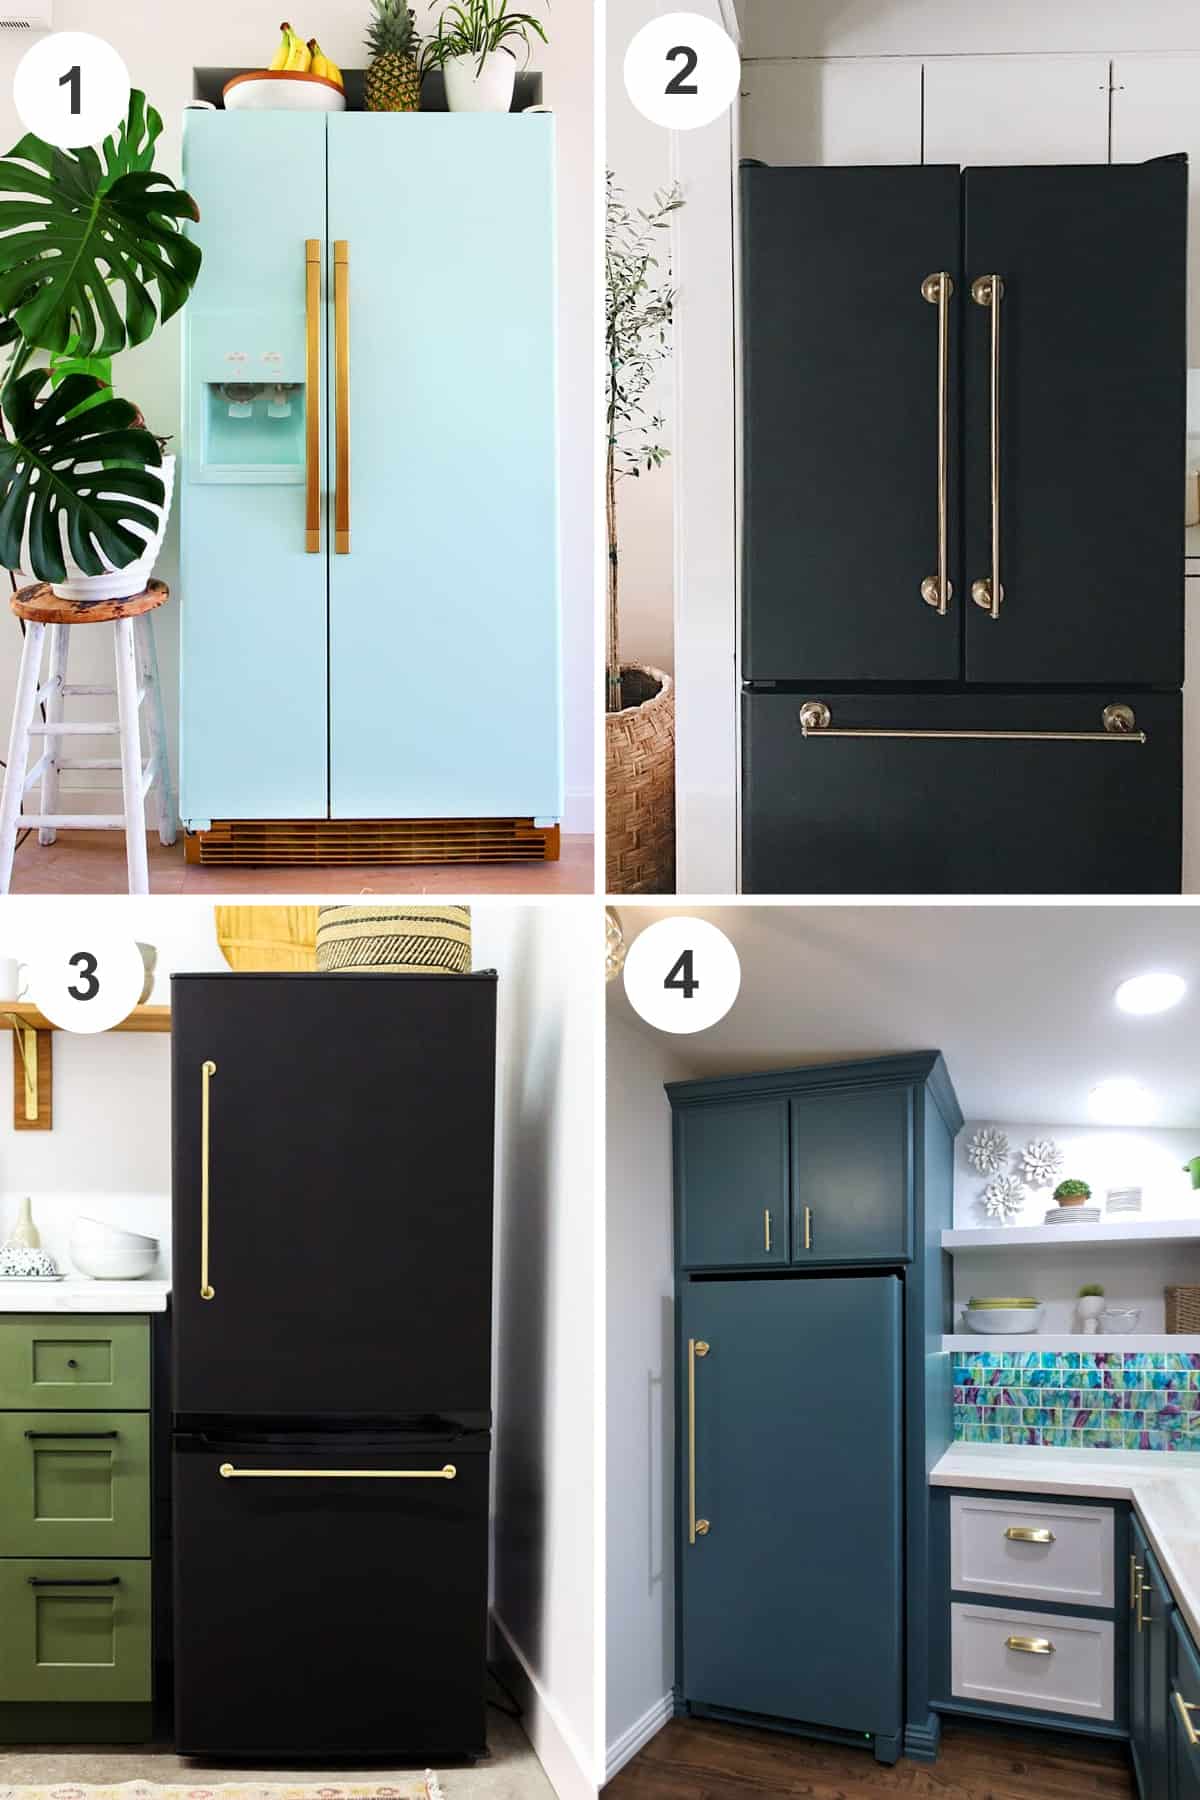 Painted refrigerator makeovers that look sleek and modern including chalk painted black, teal, and aqua colors.